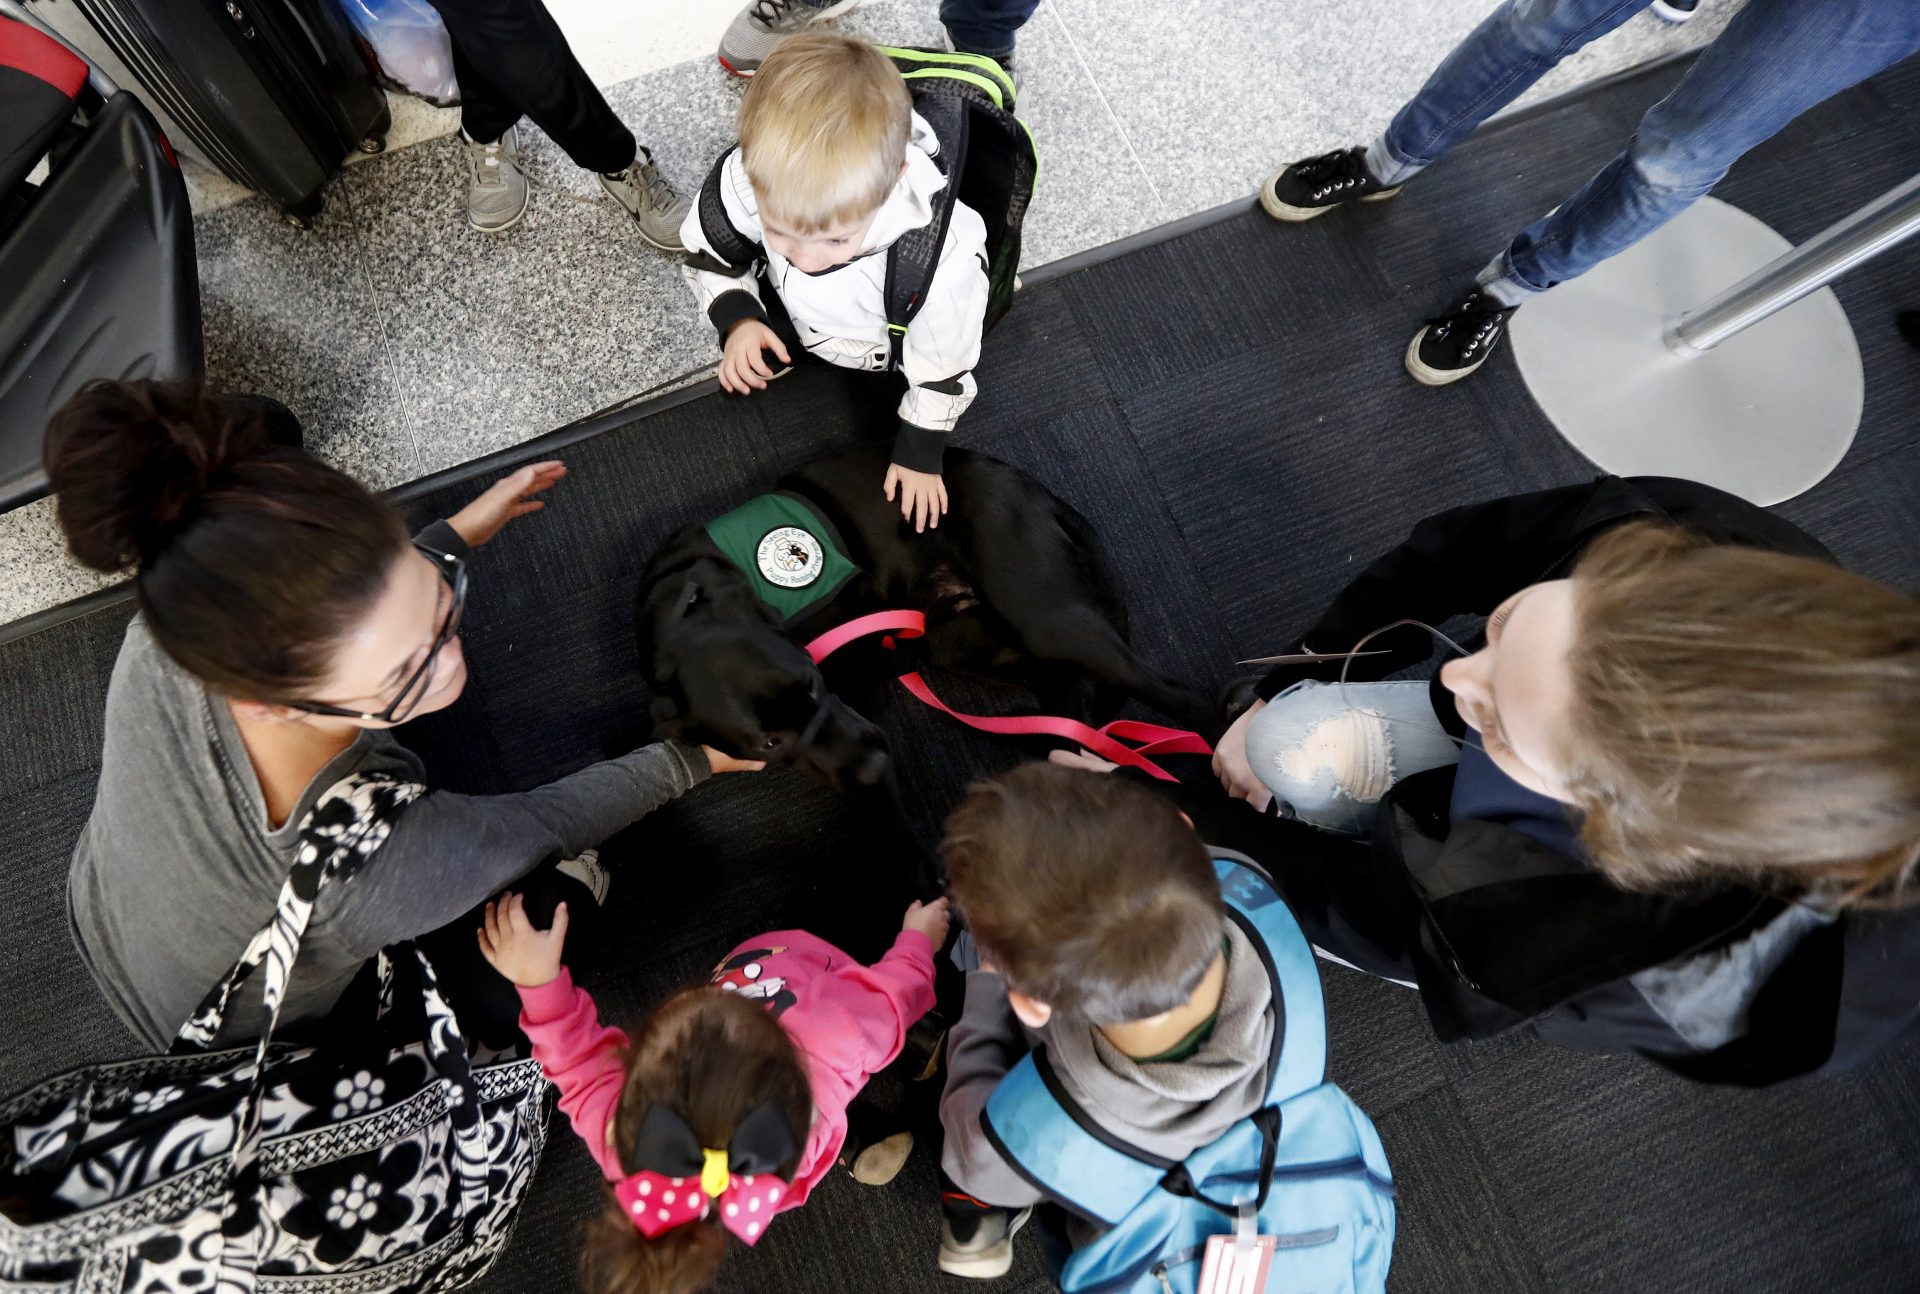 Danielle Lange, right, of Bridgewater, N.J., lets the LaCount family, of Chicago, pet her service dog named Orchid during a layover at Newark Liberty International Airport during a training exercise, Saturday, April 1, 2017, in Newark, N.J. Trainers took dogs through security check and onto a plane as part of the exercise put on by the Seeing Eye puppy program.